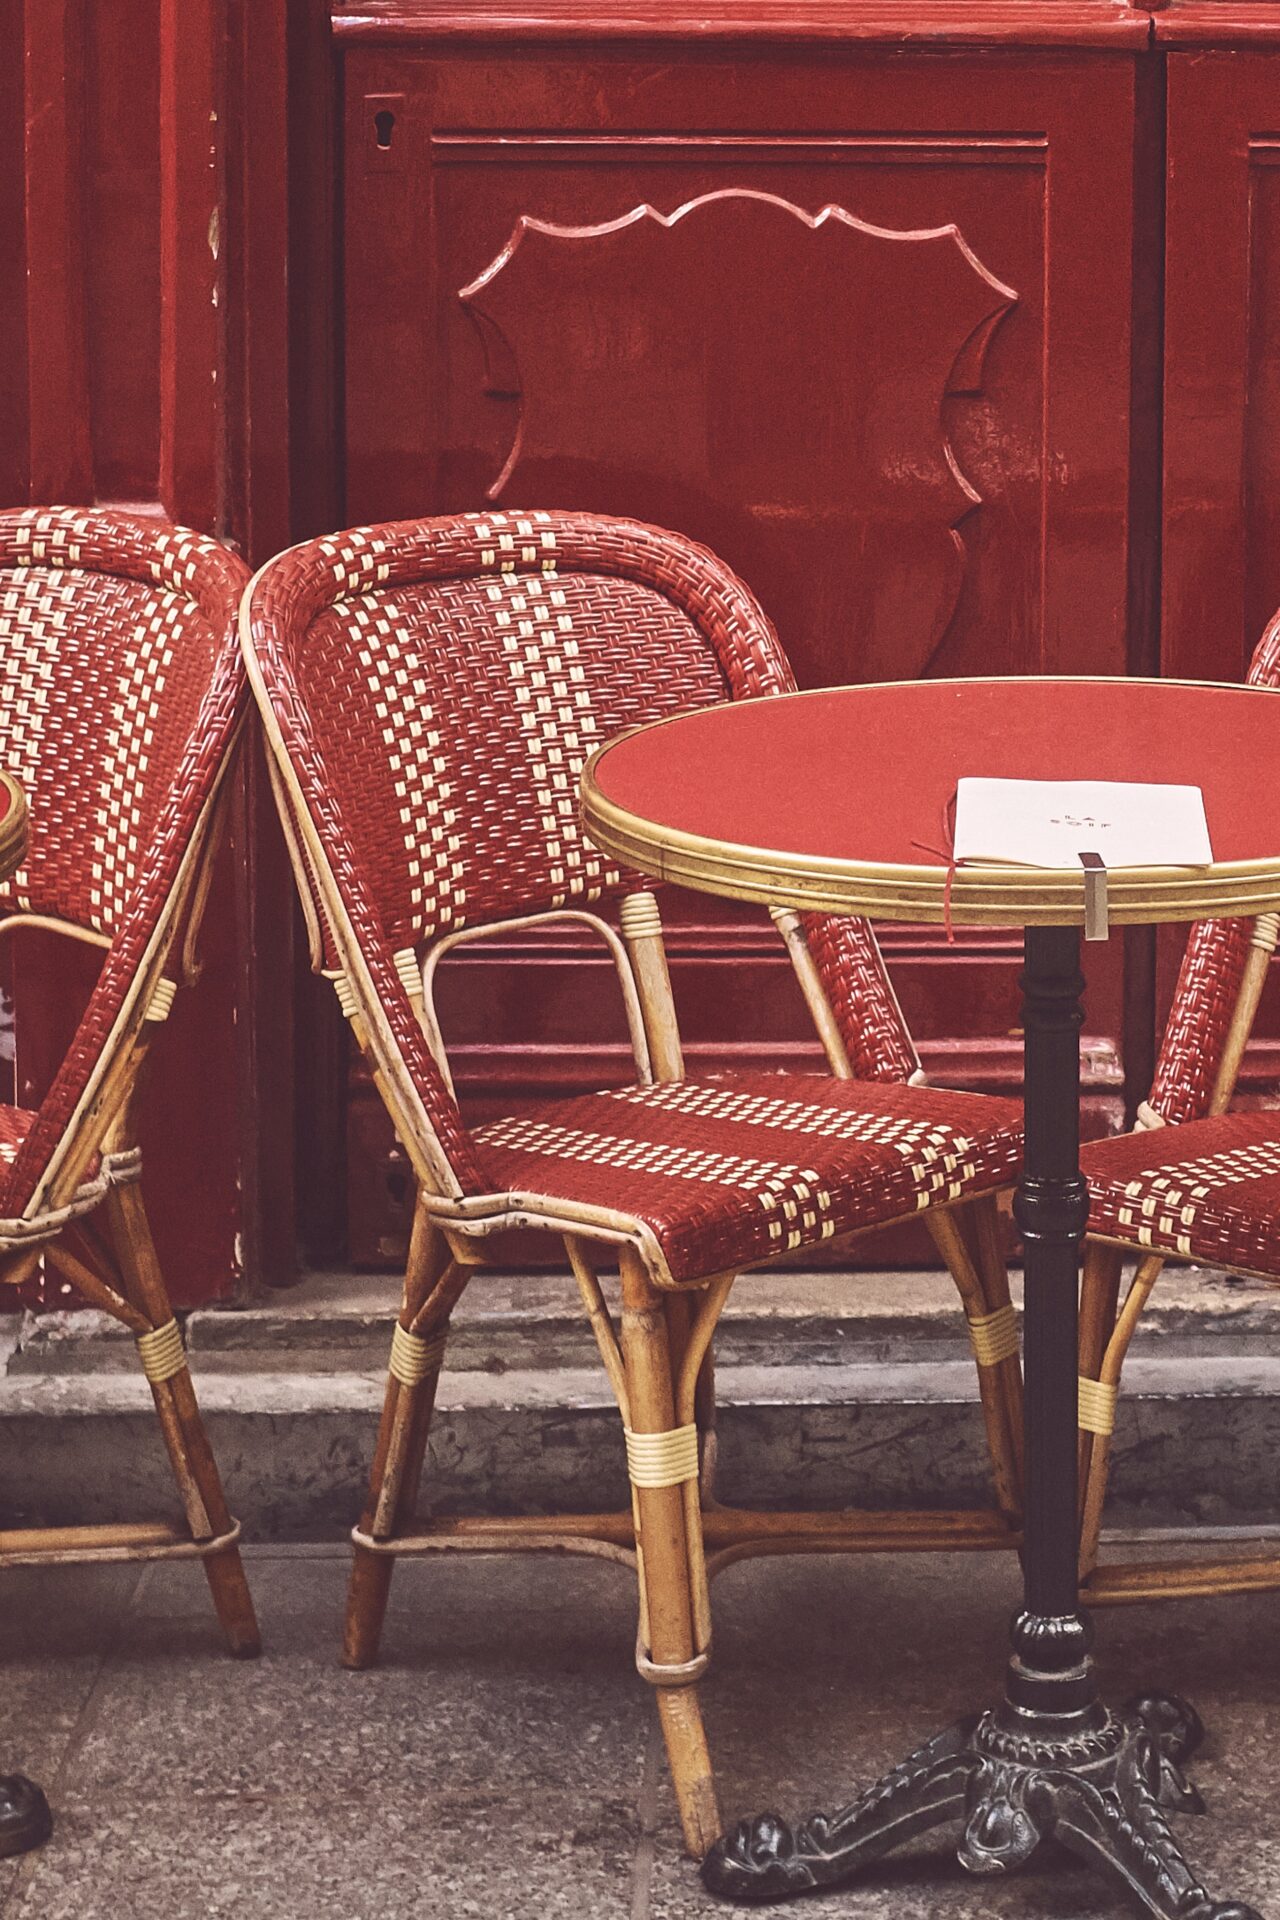 Is the hidden gem dead? A view of a red bistro chair by a red round table on a street